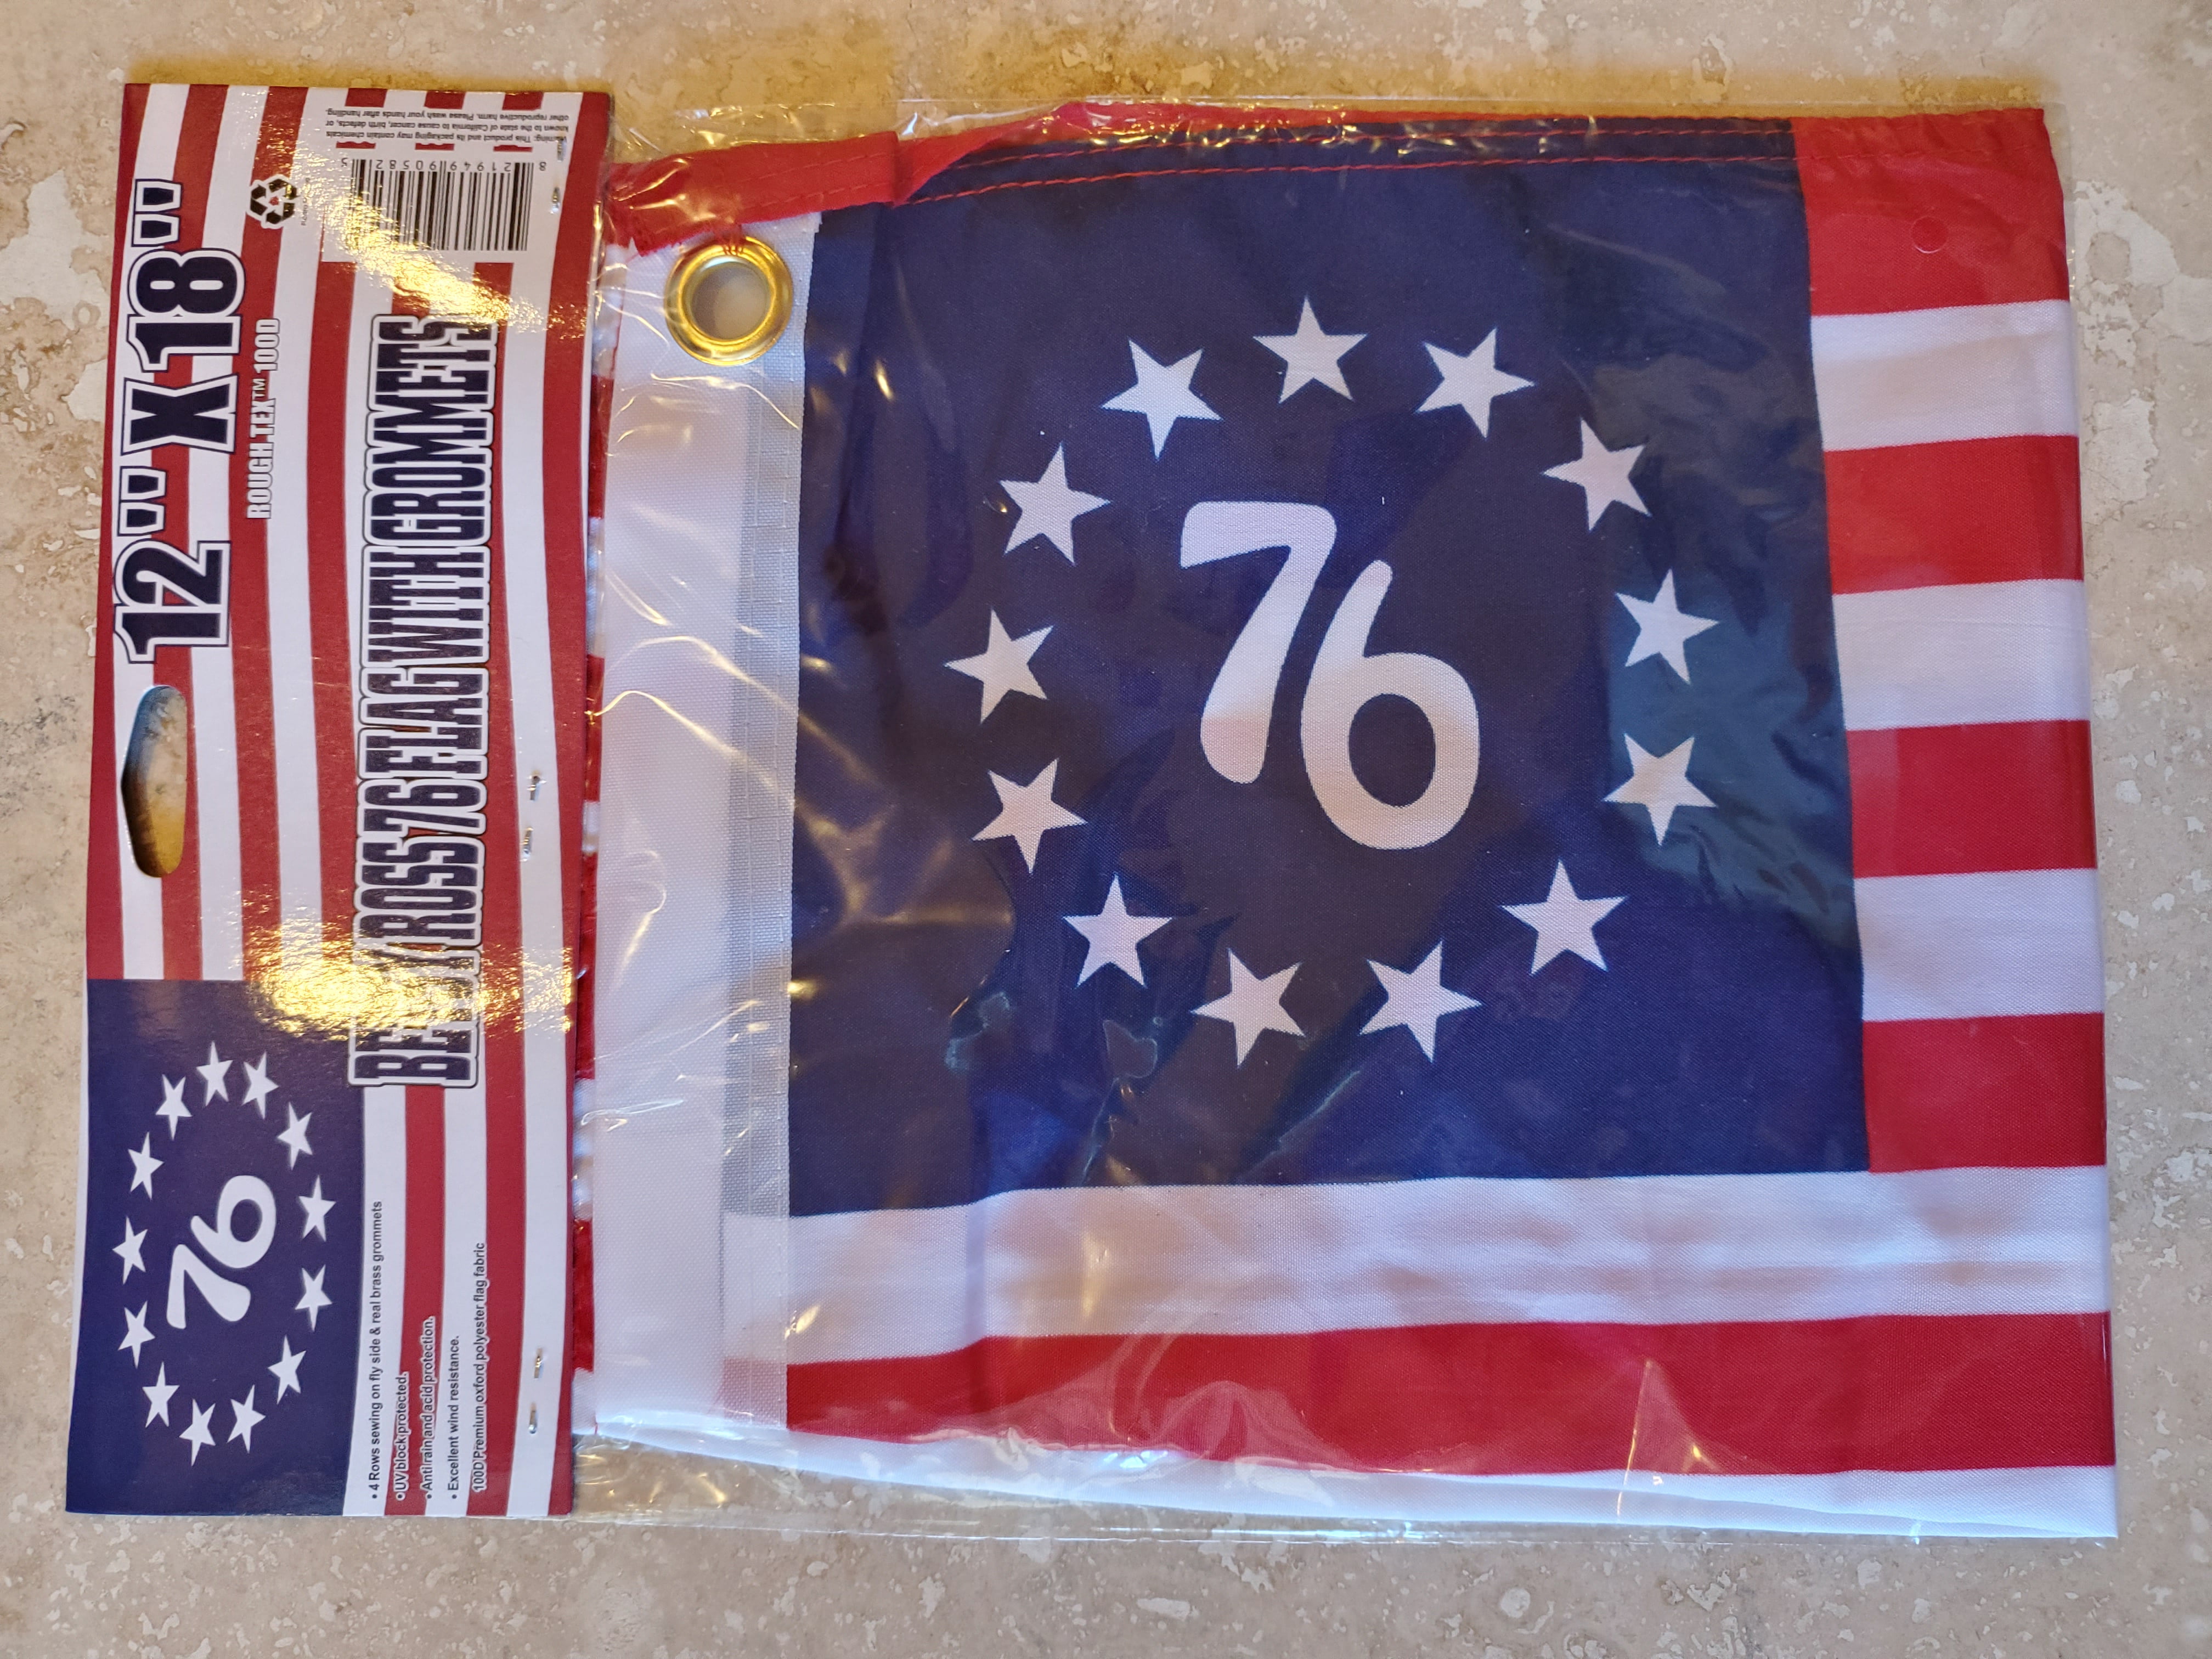 Betsy Ross 1776 Historical Indoor Outdoor Dyed Nylon Boat Flag Grommets 12"X18" 